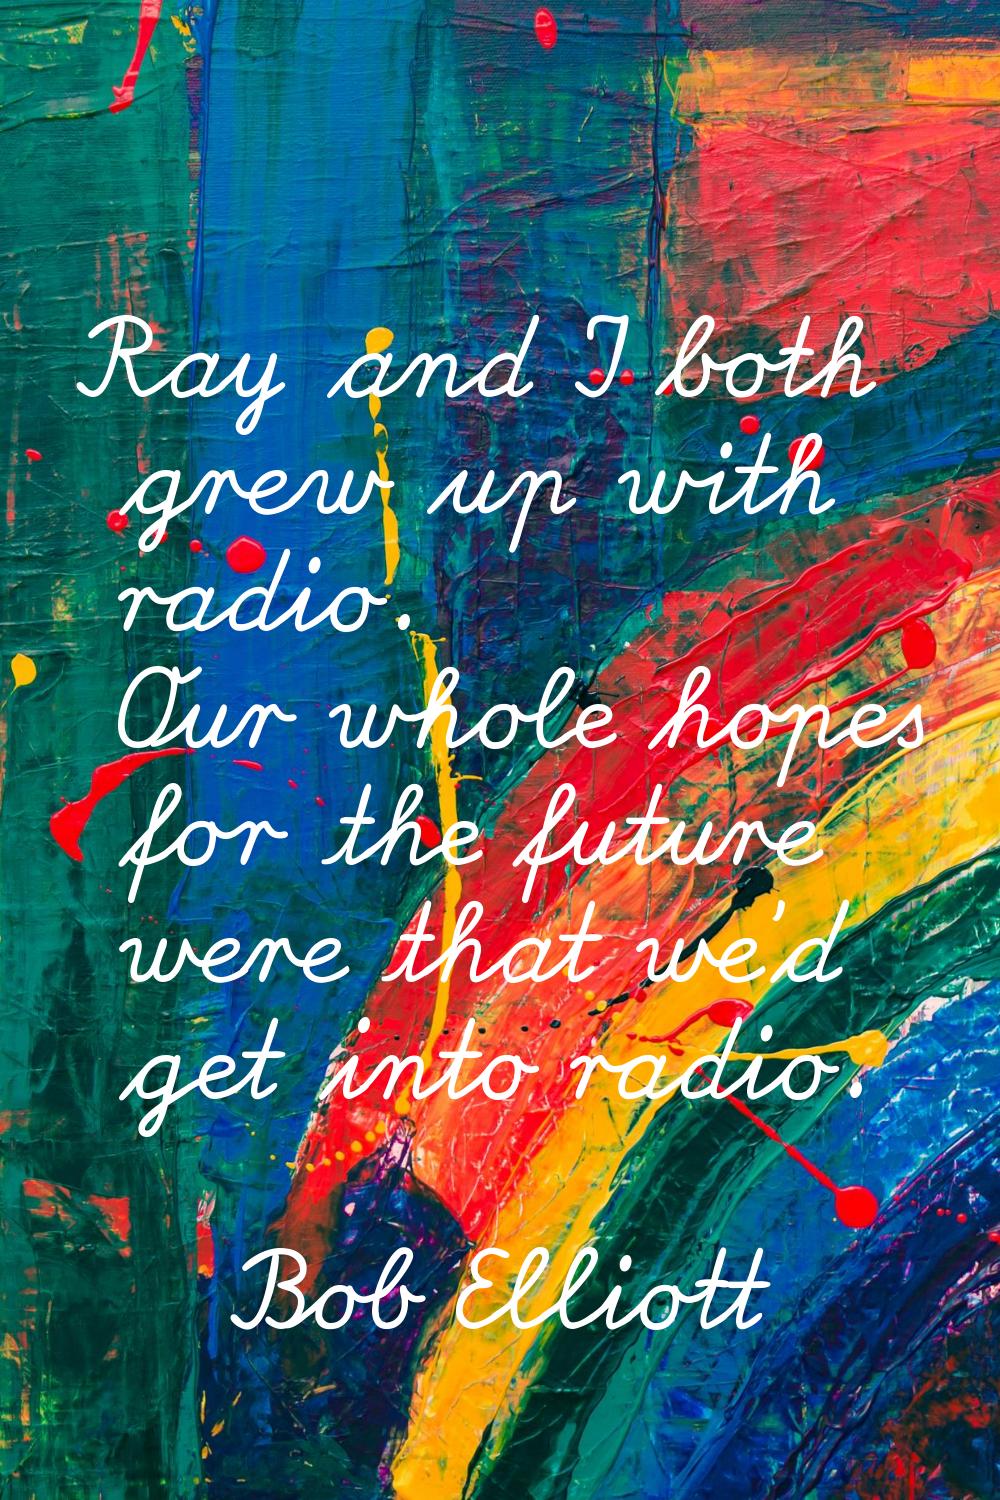 Ray and I both grew up with radio. Our whole hopes for the future were that we'd get into radio.